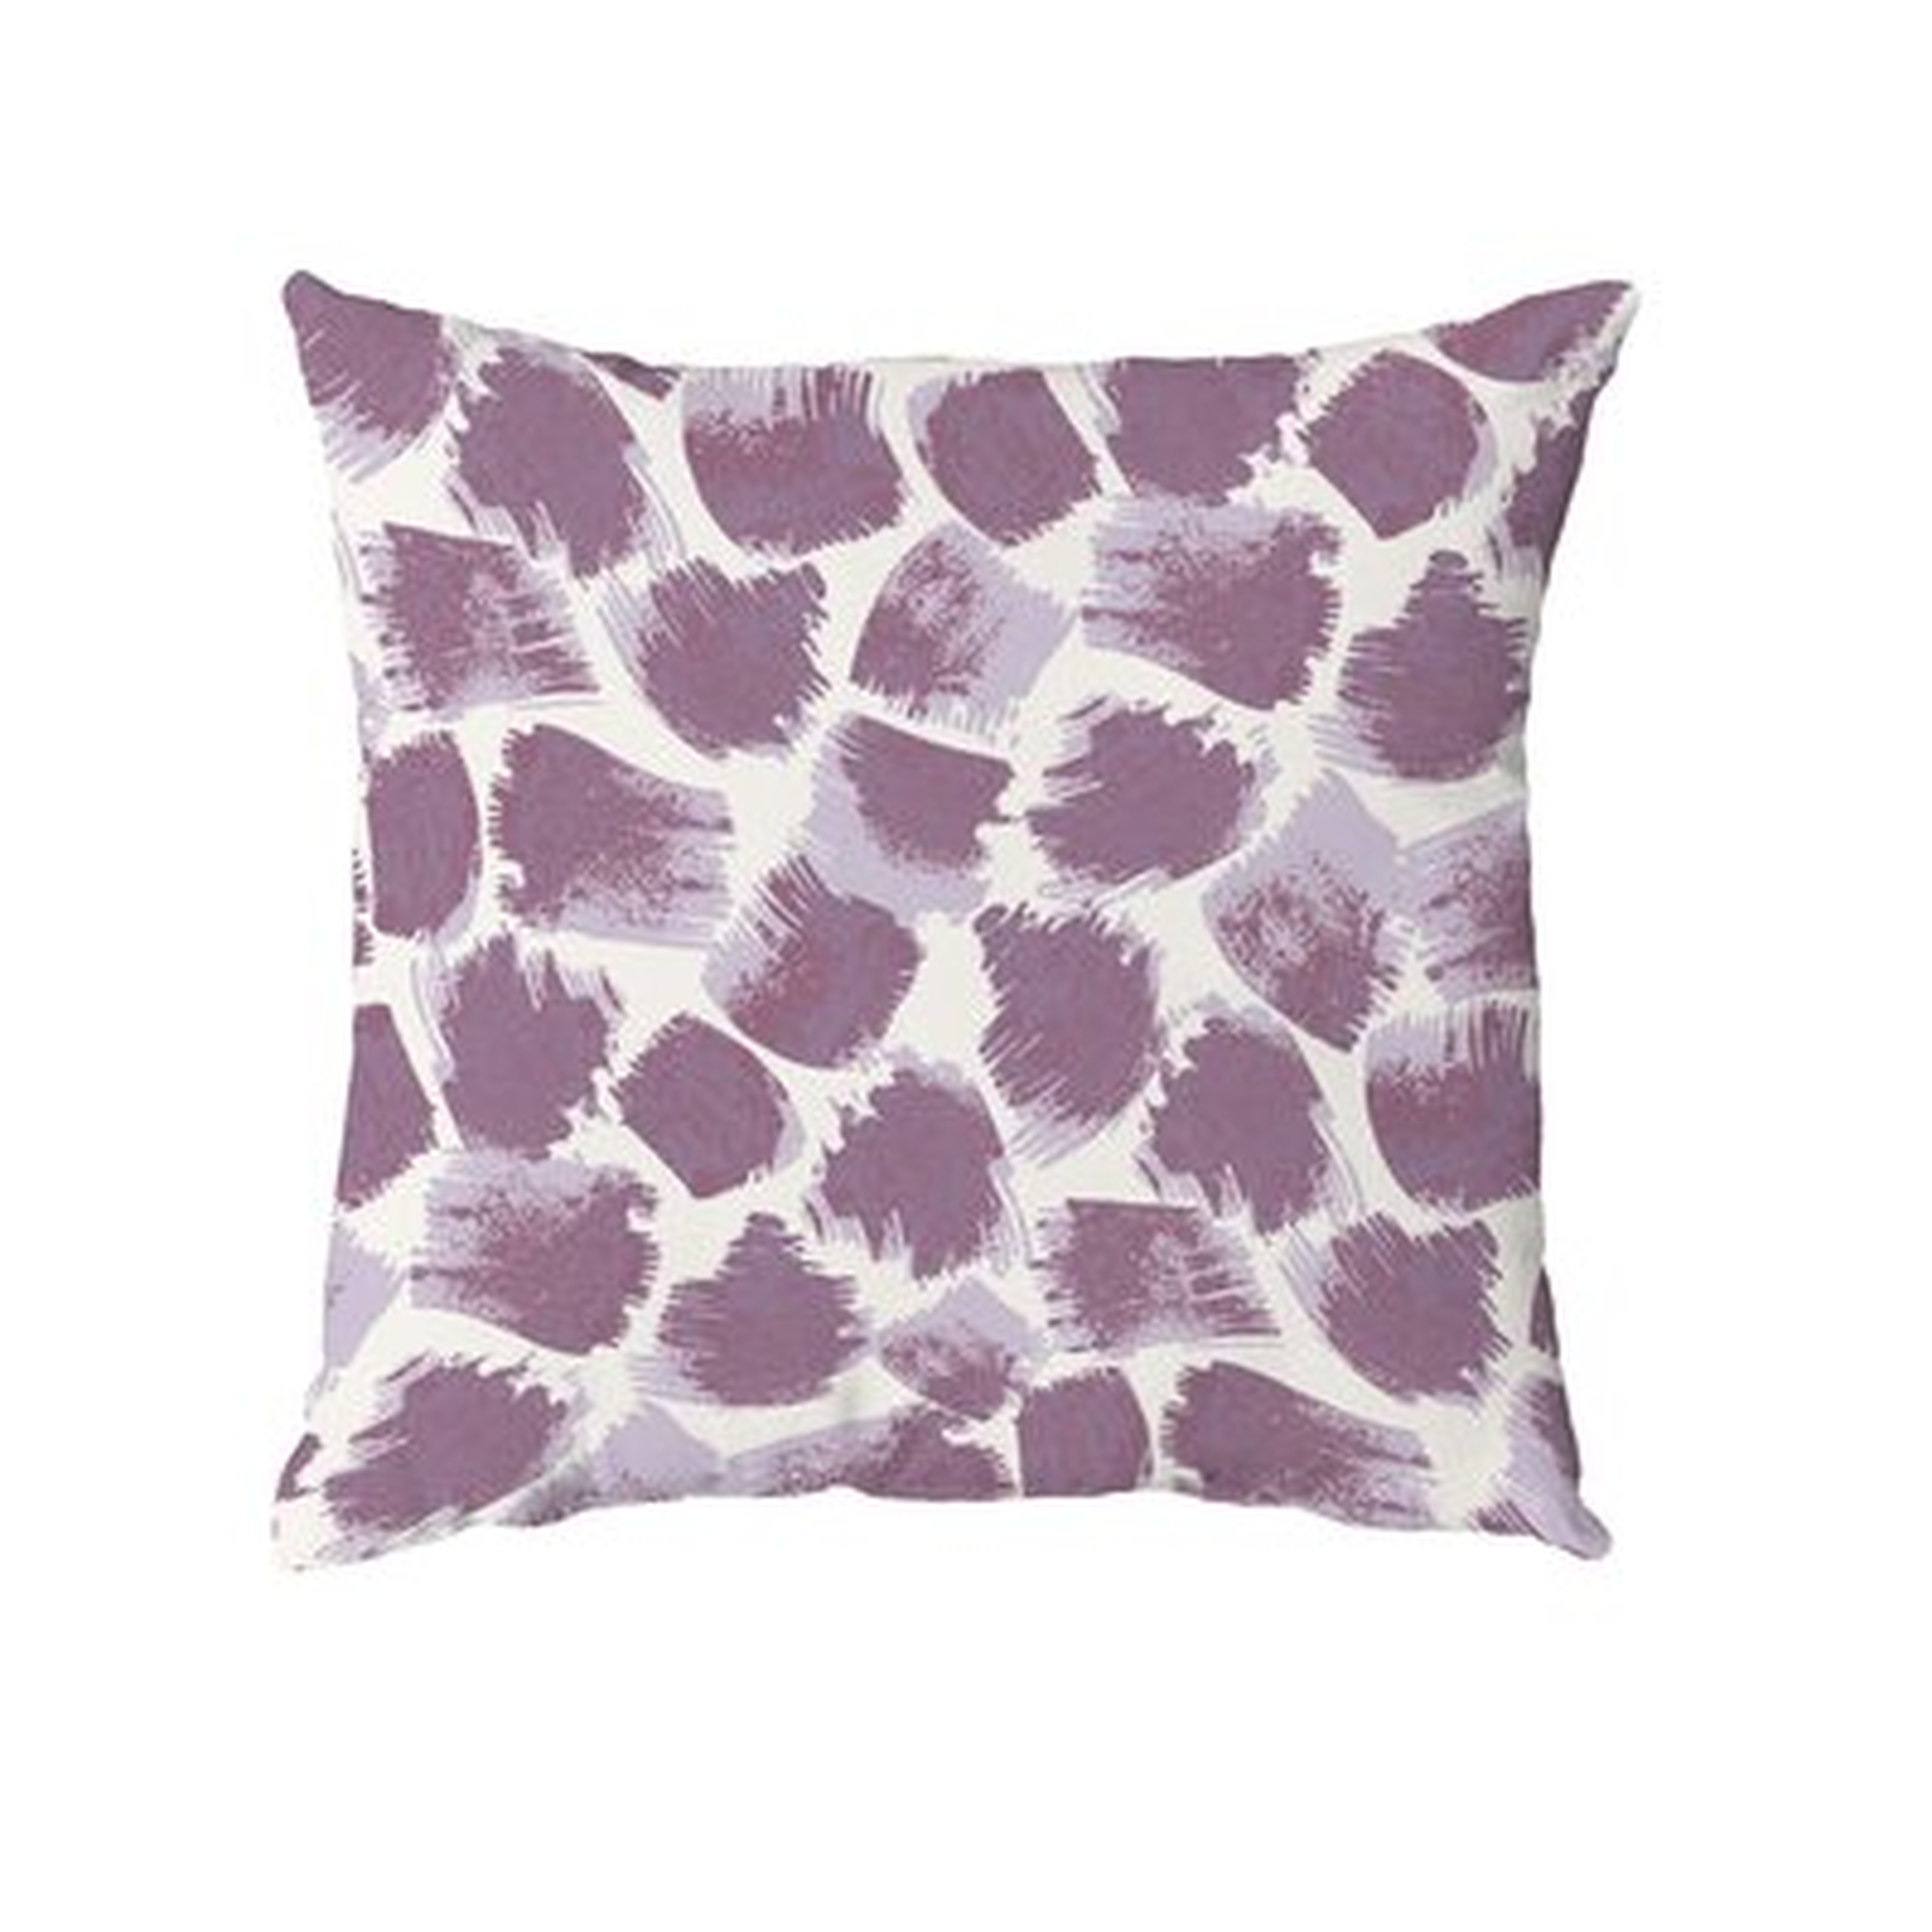 Bricelyn Square Pillow Cover & Insert - Wayfair